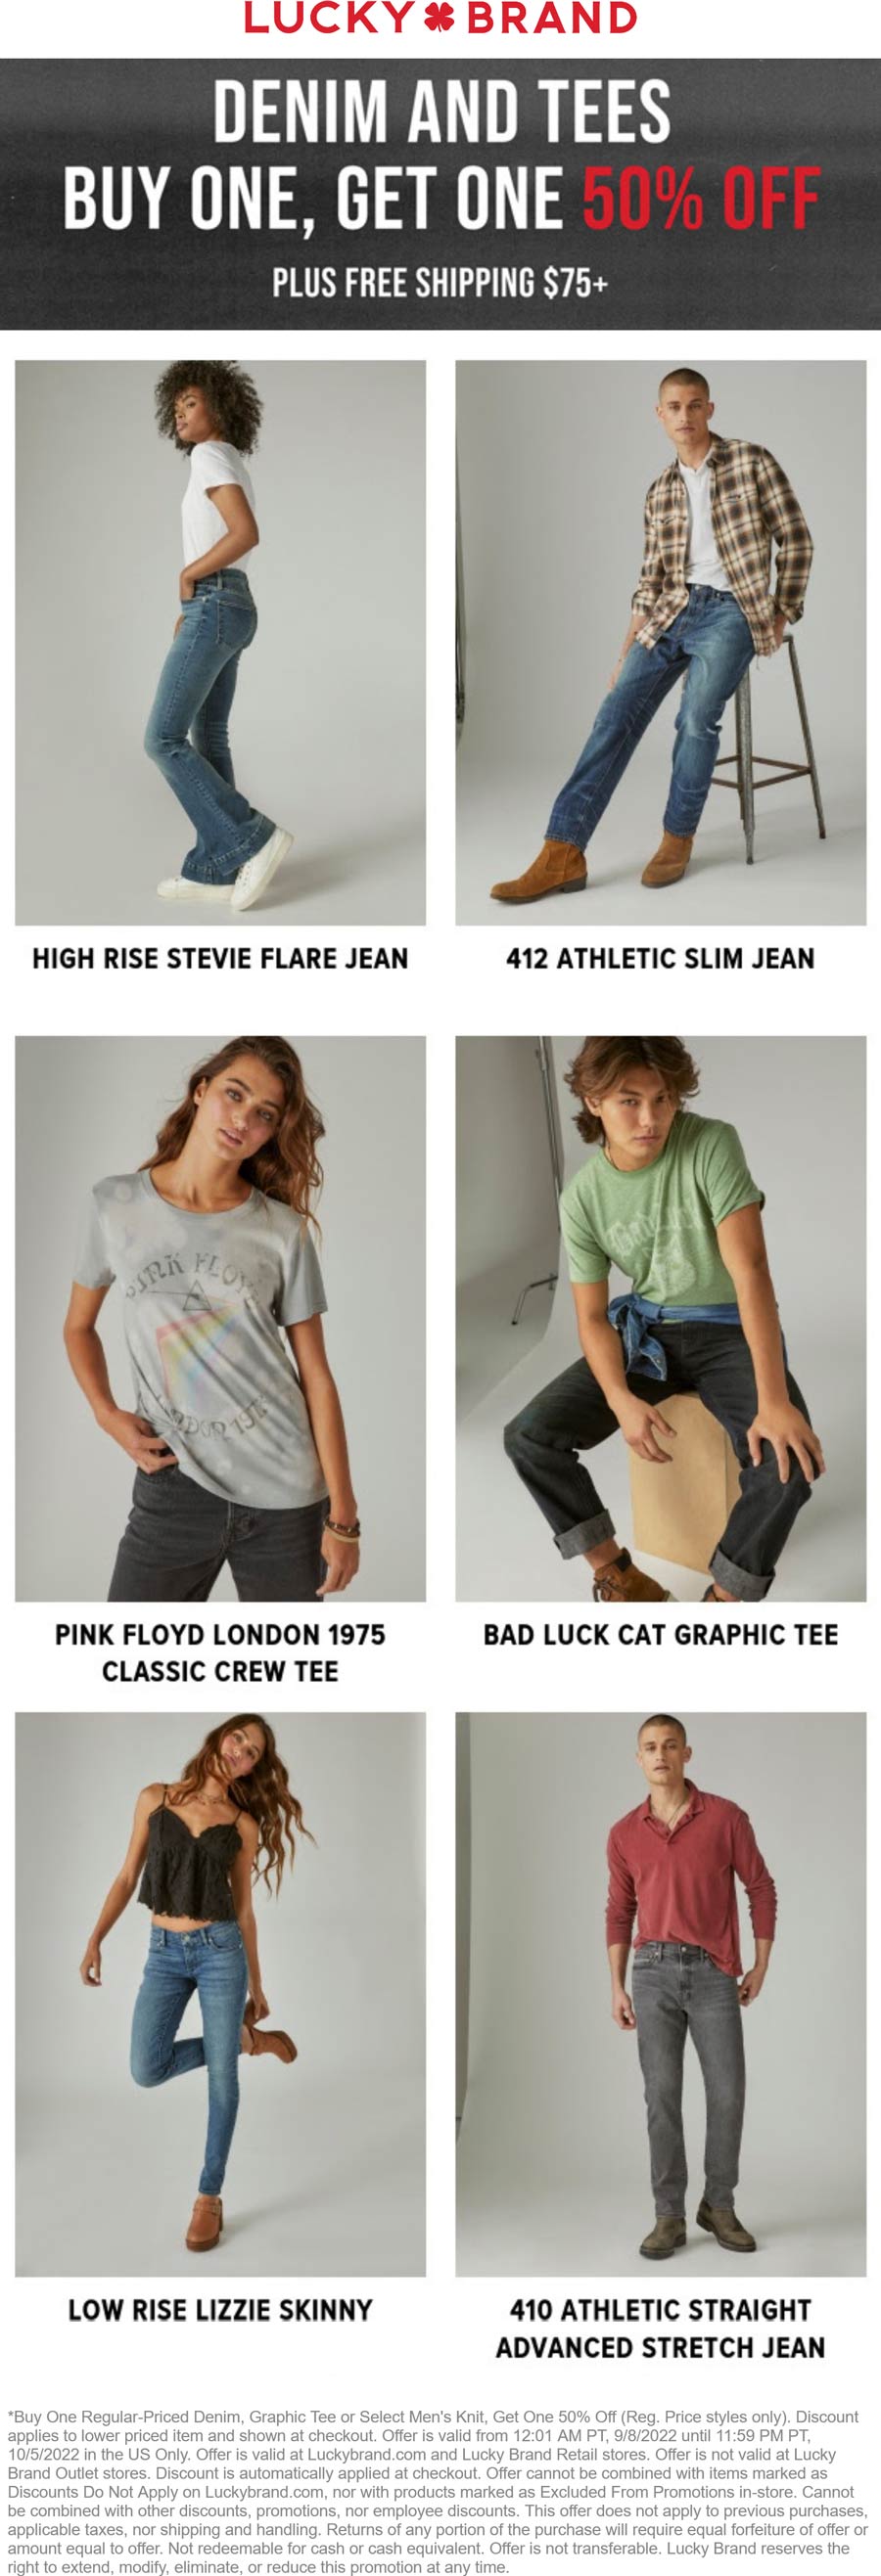 Lucky Brand stores Coupon  Second jeans or t-shirt 50% off at Lucky Brand, ditto online #luckybrand 